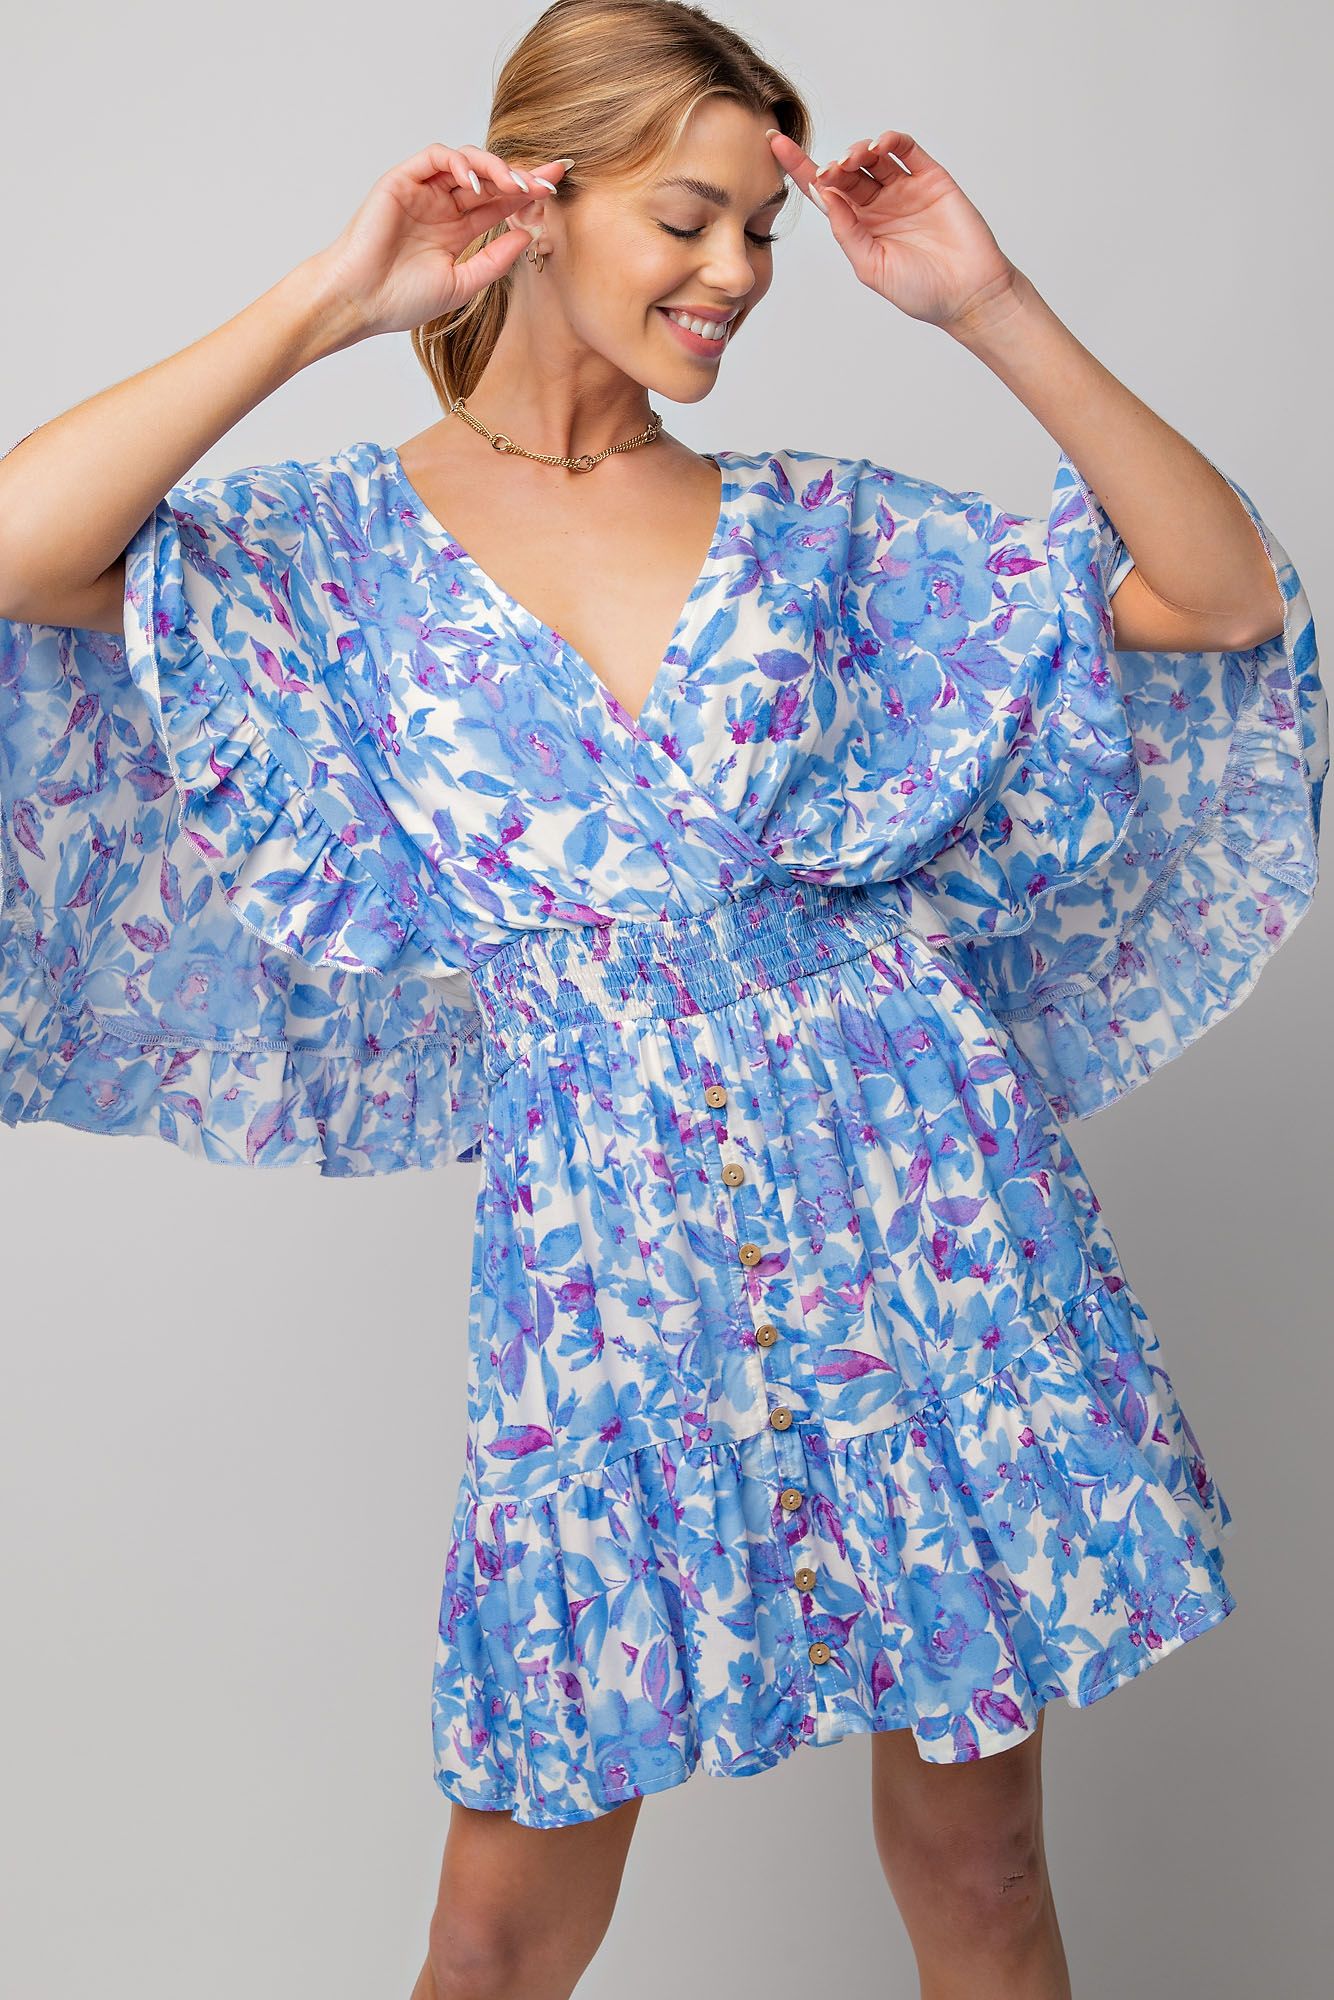 NEW -  Easel BLUE & PURPLE Floral Challis Ruffle Wing Sleeve Dress!